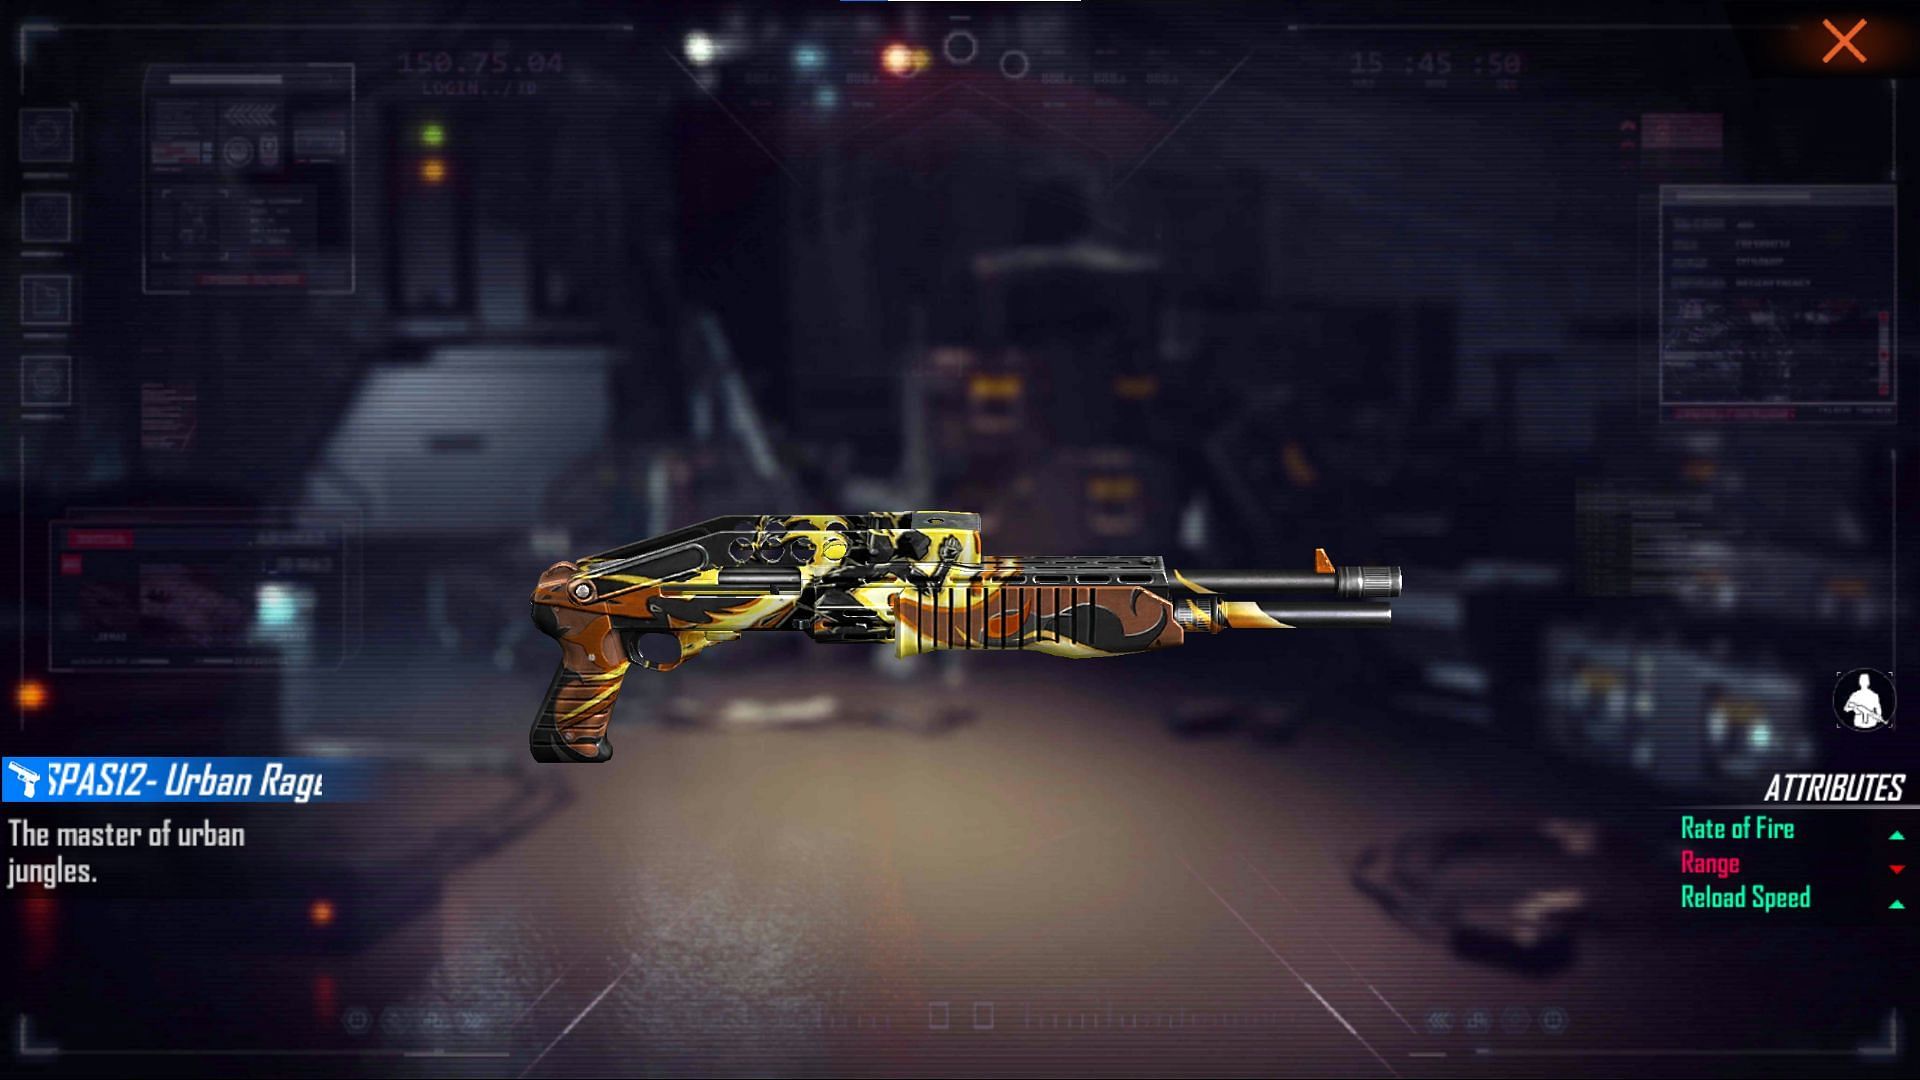 The SPAS12 - Urban Rager is also available in Weapon Royale (Image via Free Fire)